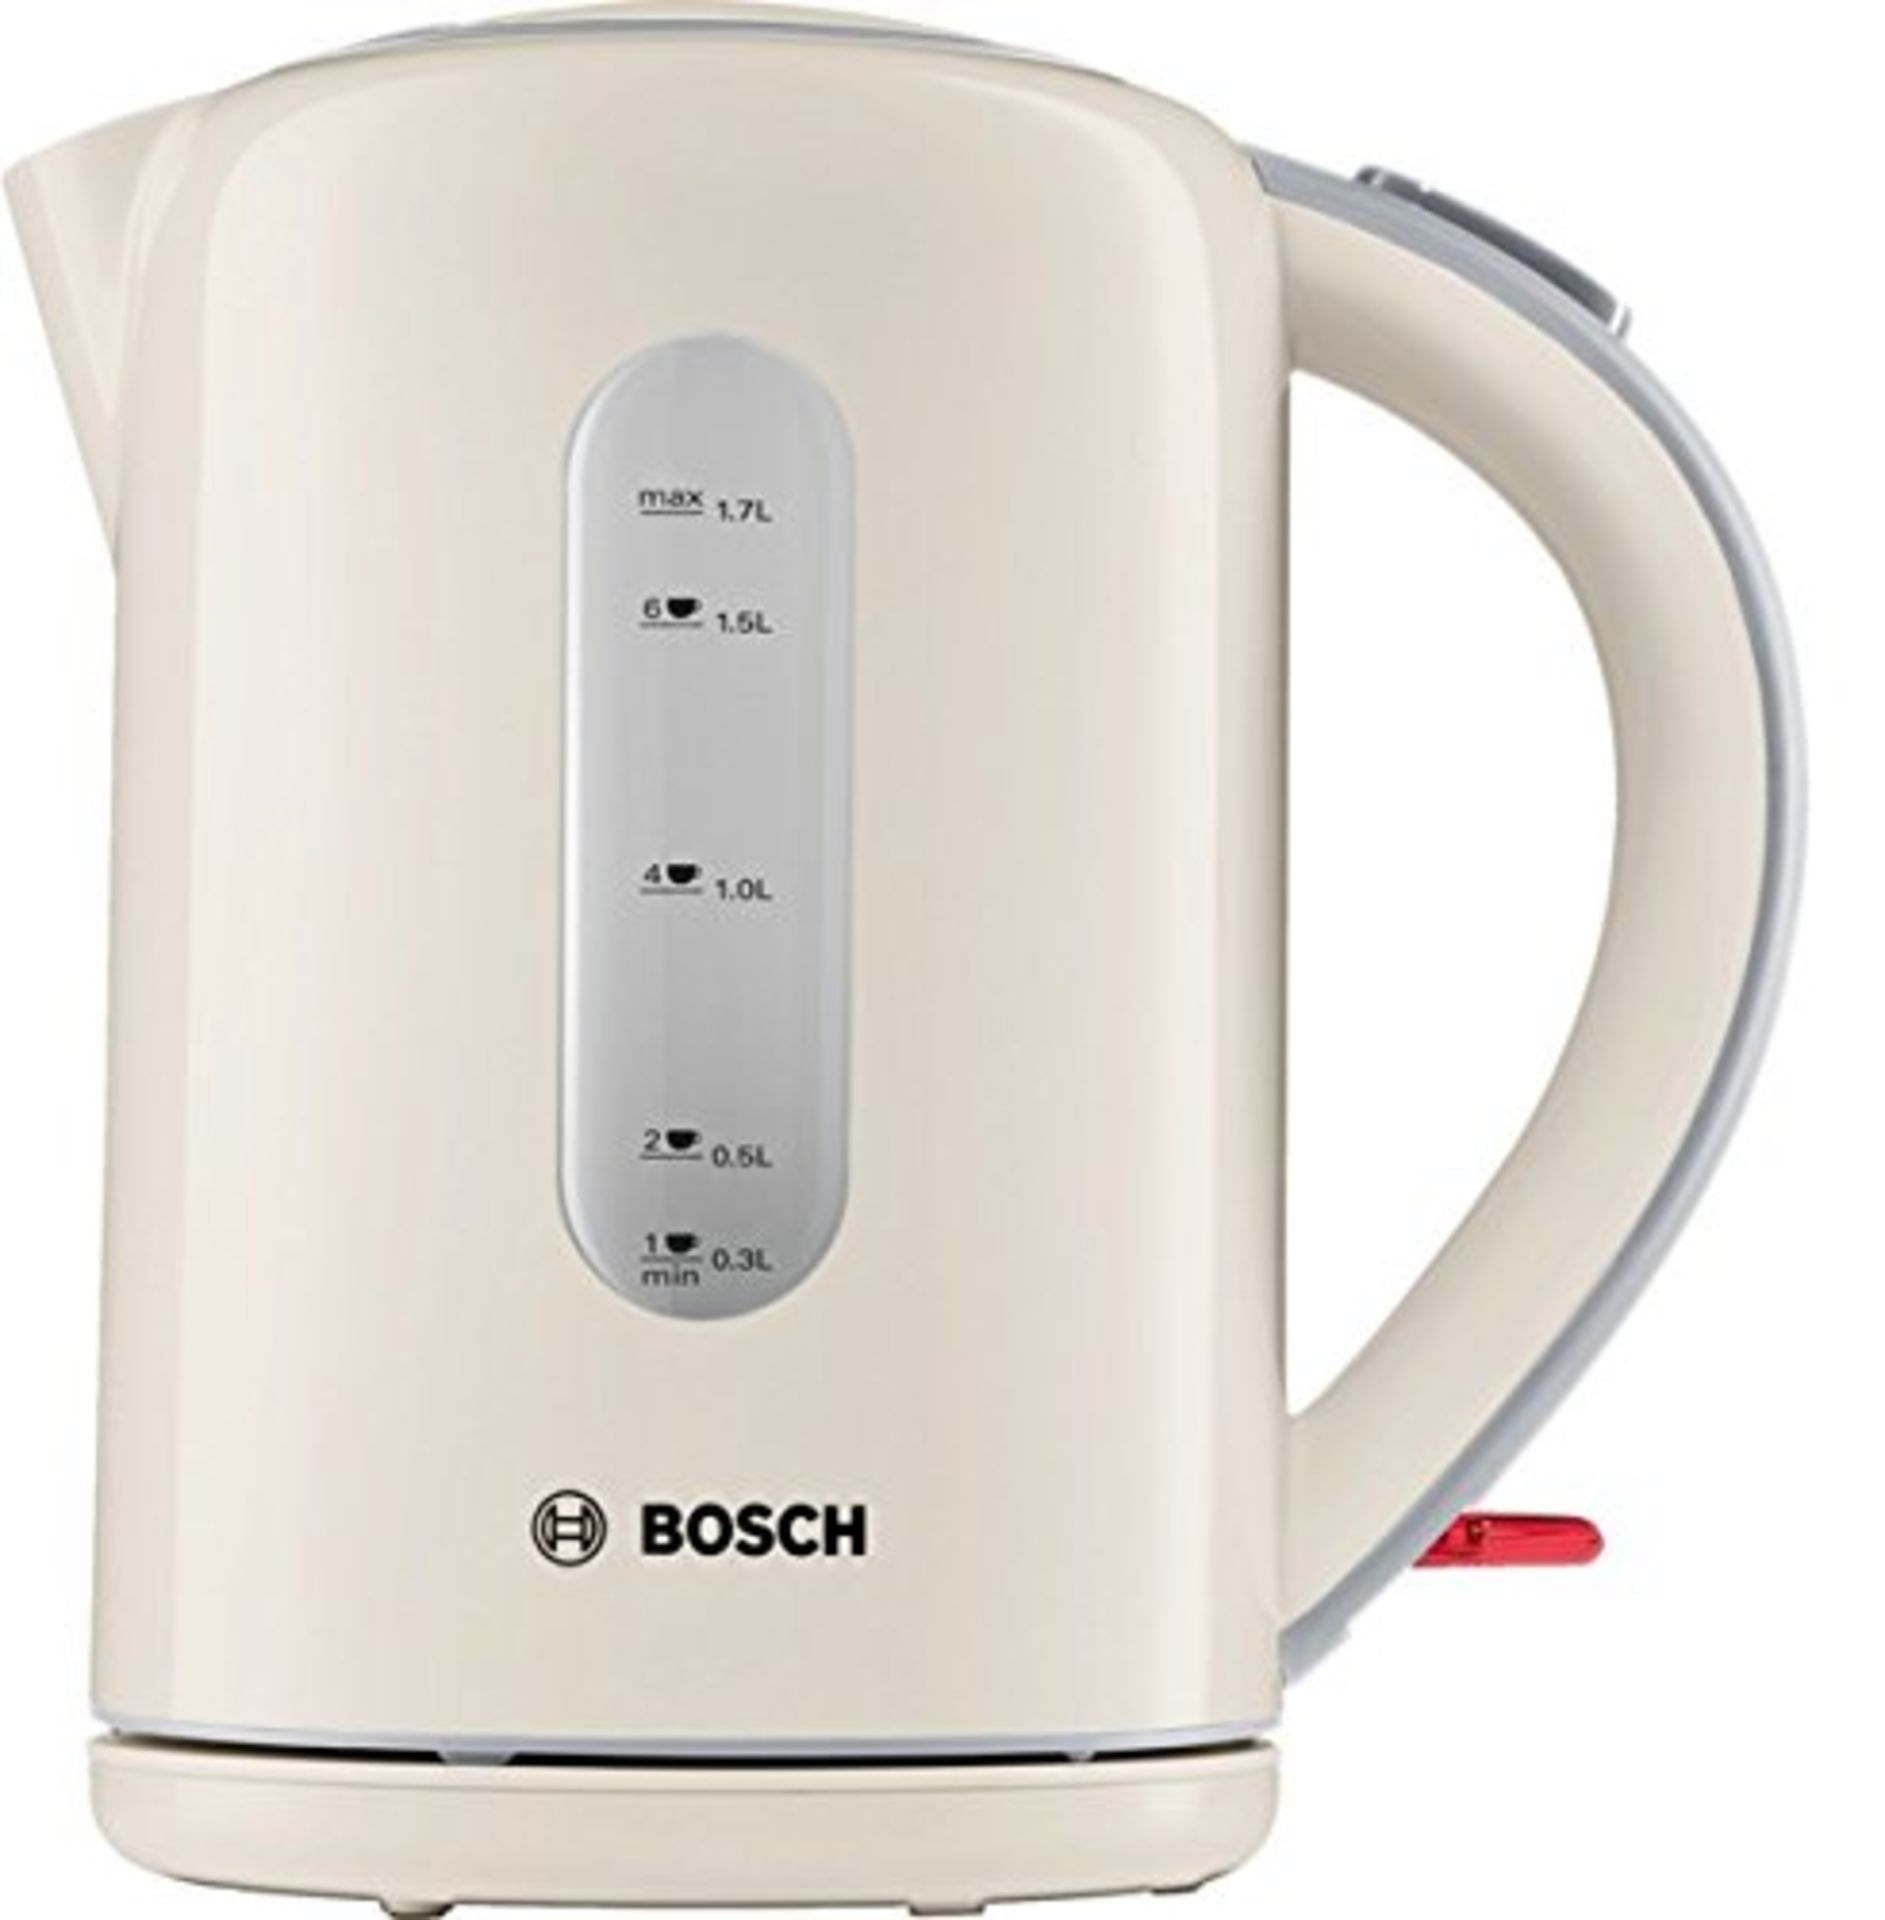 V Brand New Bosch 1.7l Cordless Electric Kettle 3000W (Cream & Grey) ISP £29.45 (Amazon) X 2 YOUR